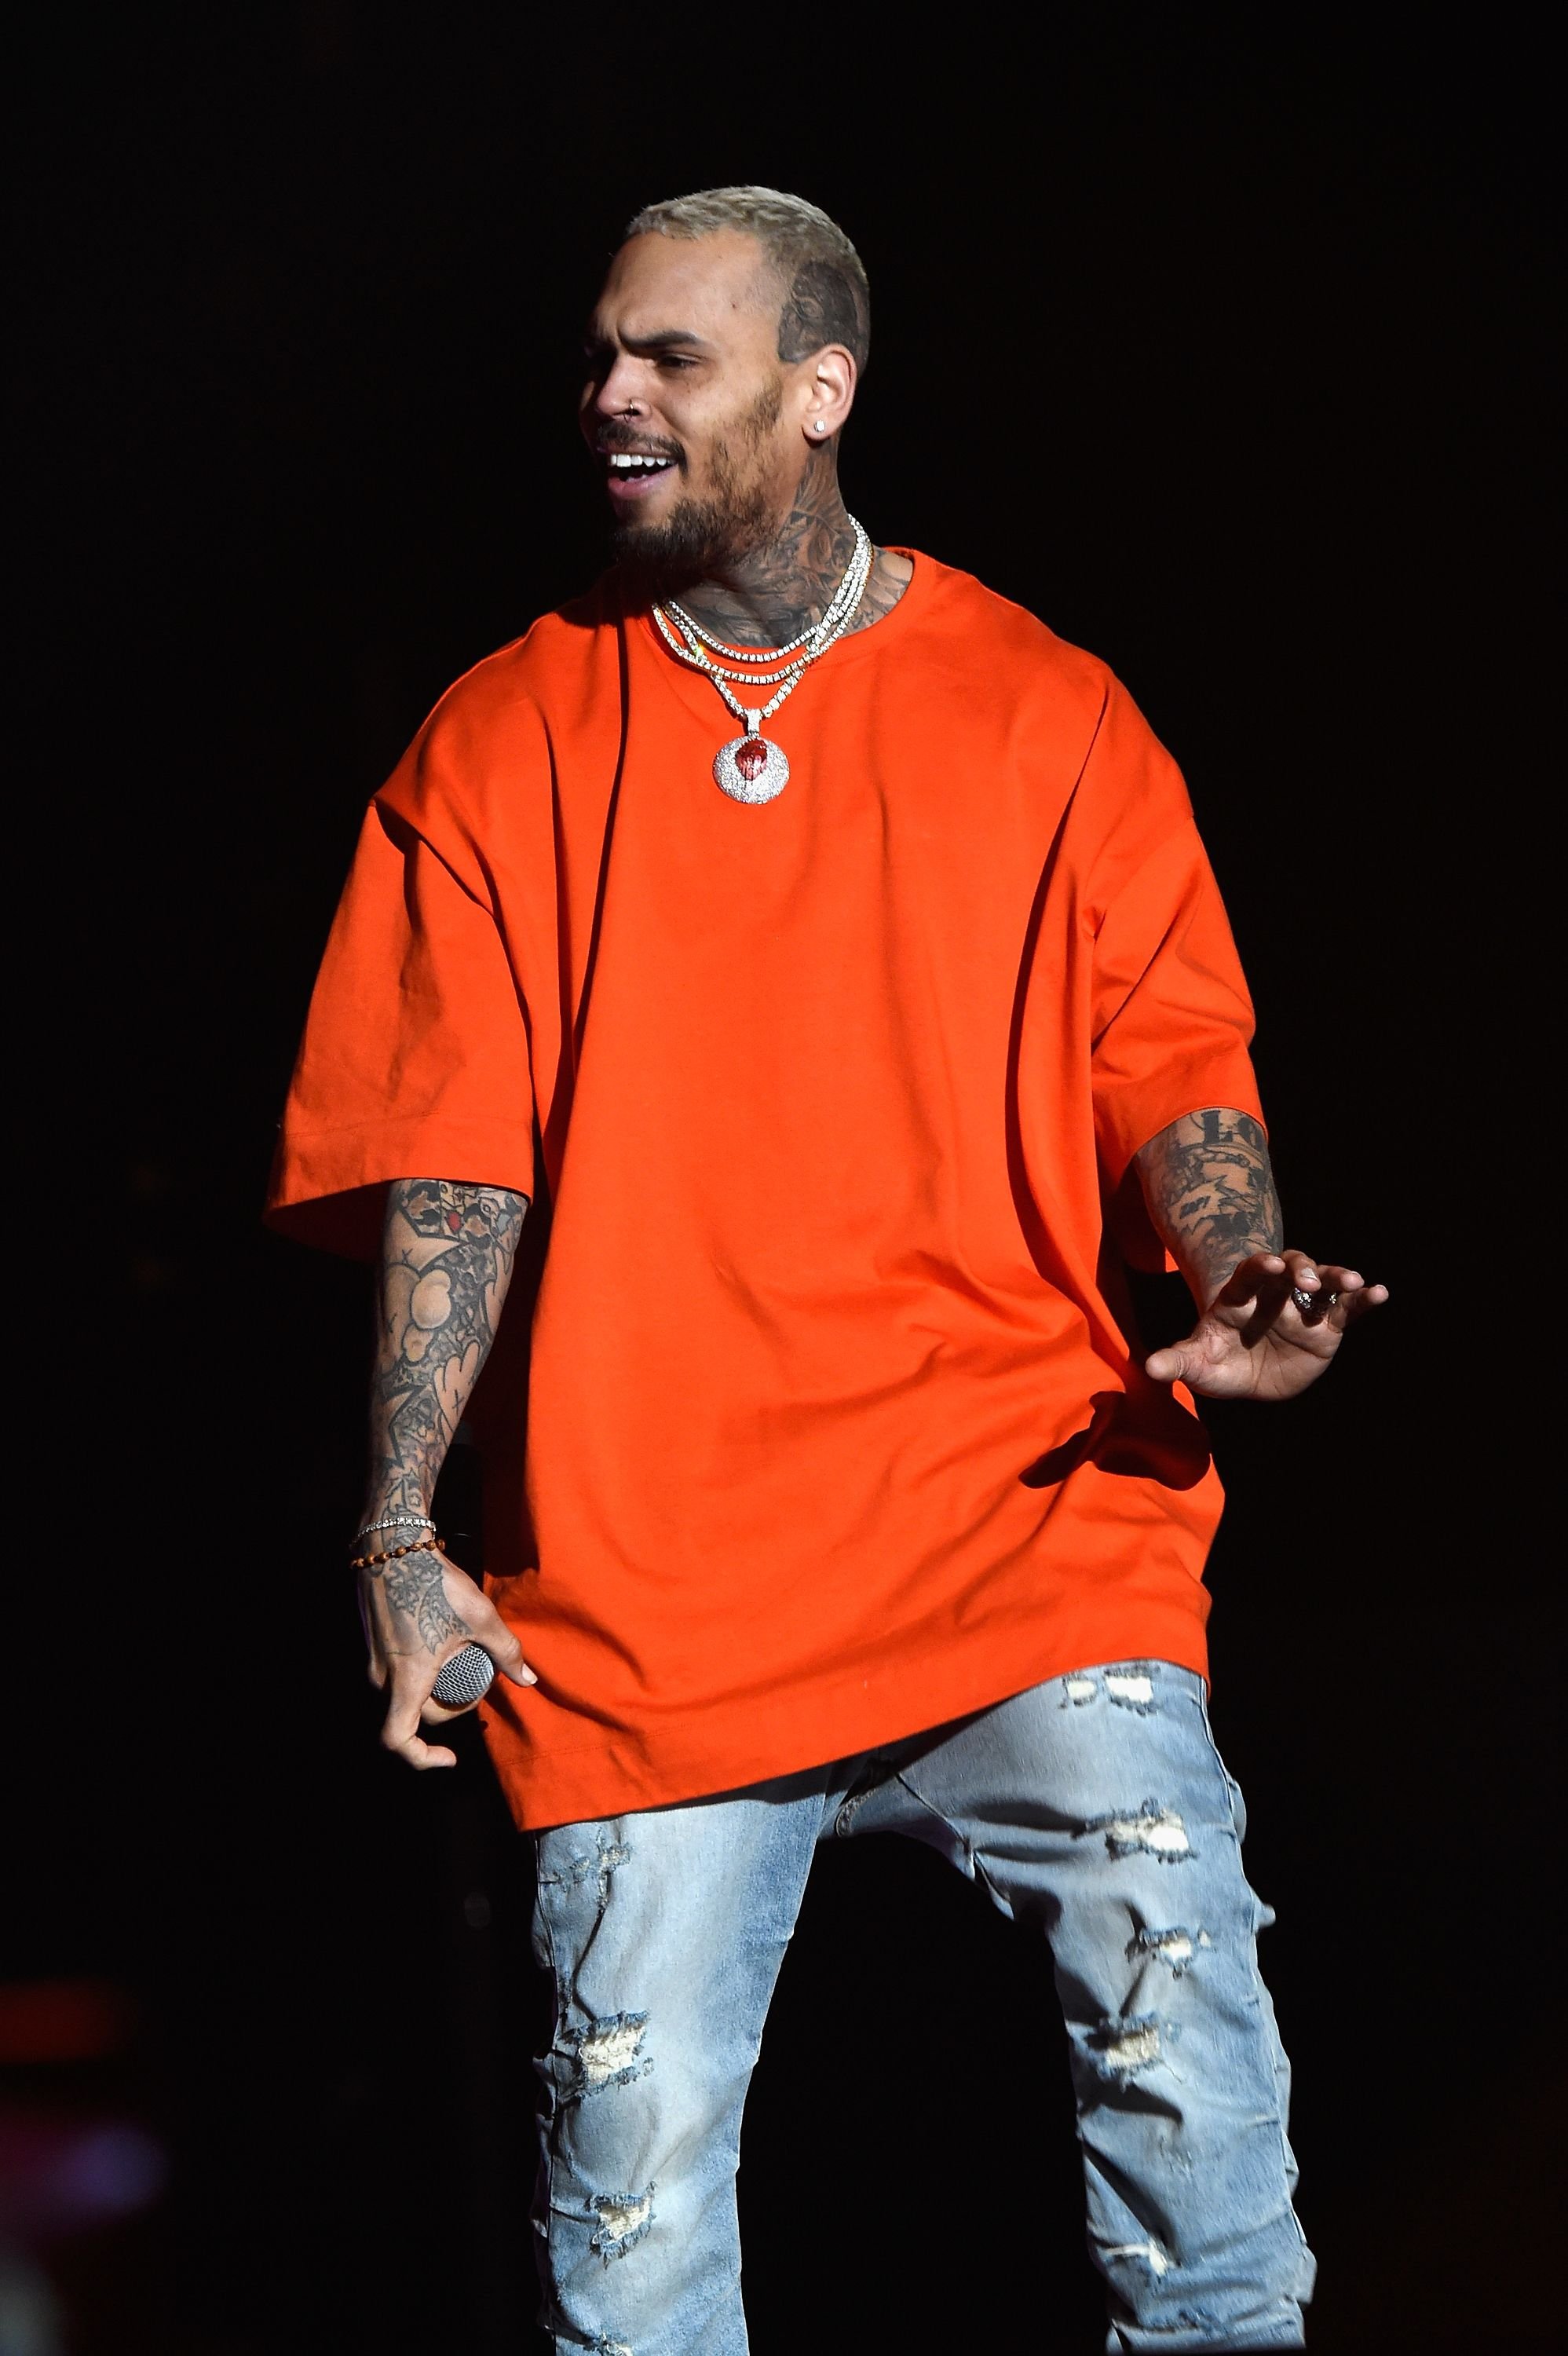 Chris Brown performs at Demi Lovato "Tell Me You Love Me" World Tour at The Forum on March 2, 2018 | Photo: Getty Images